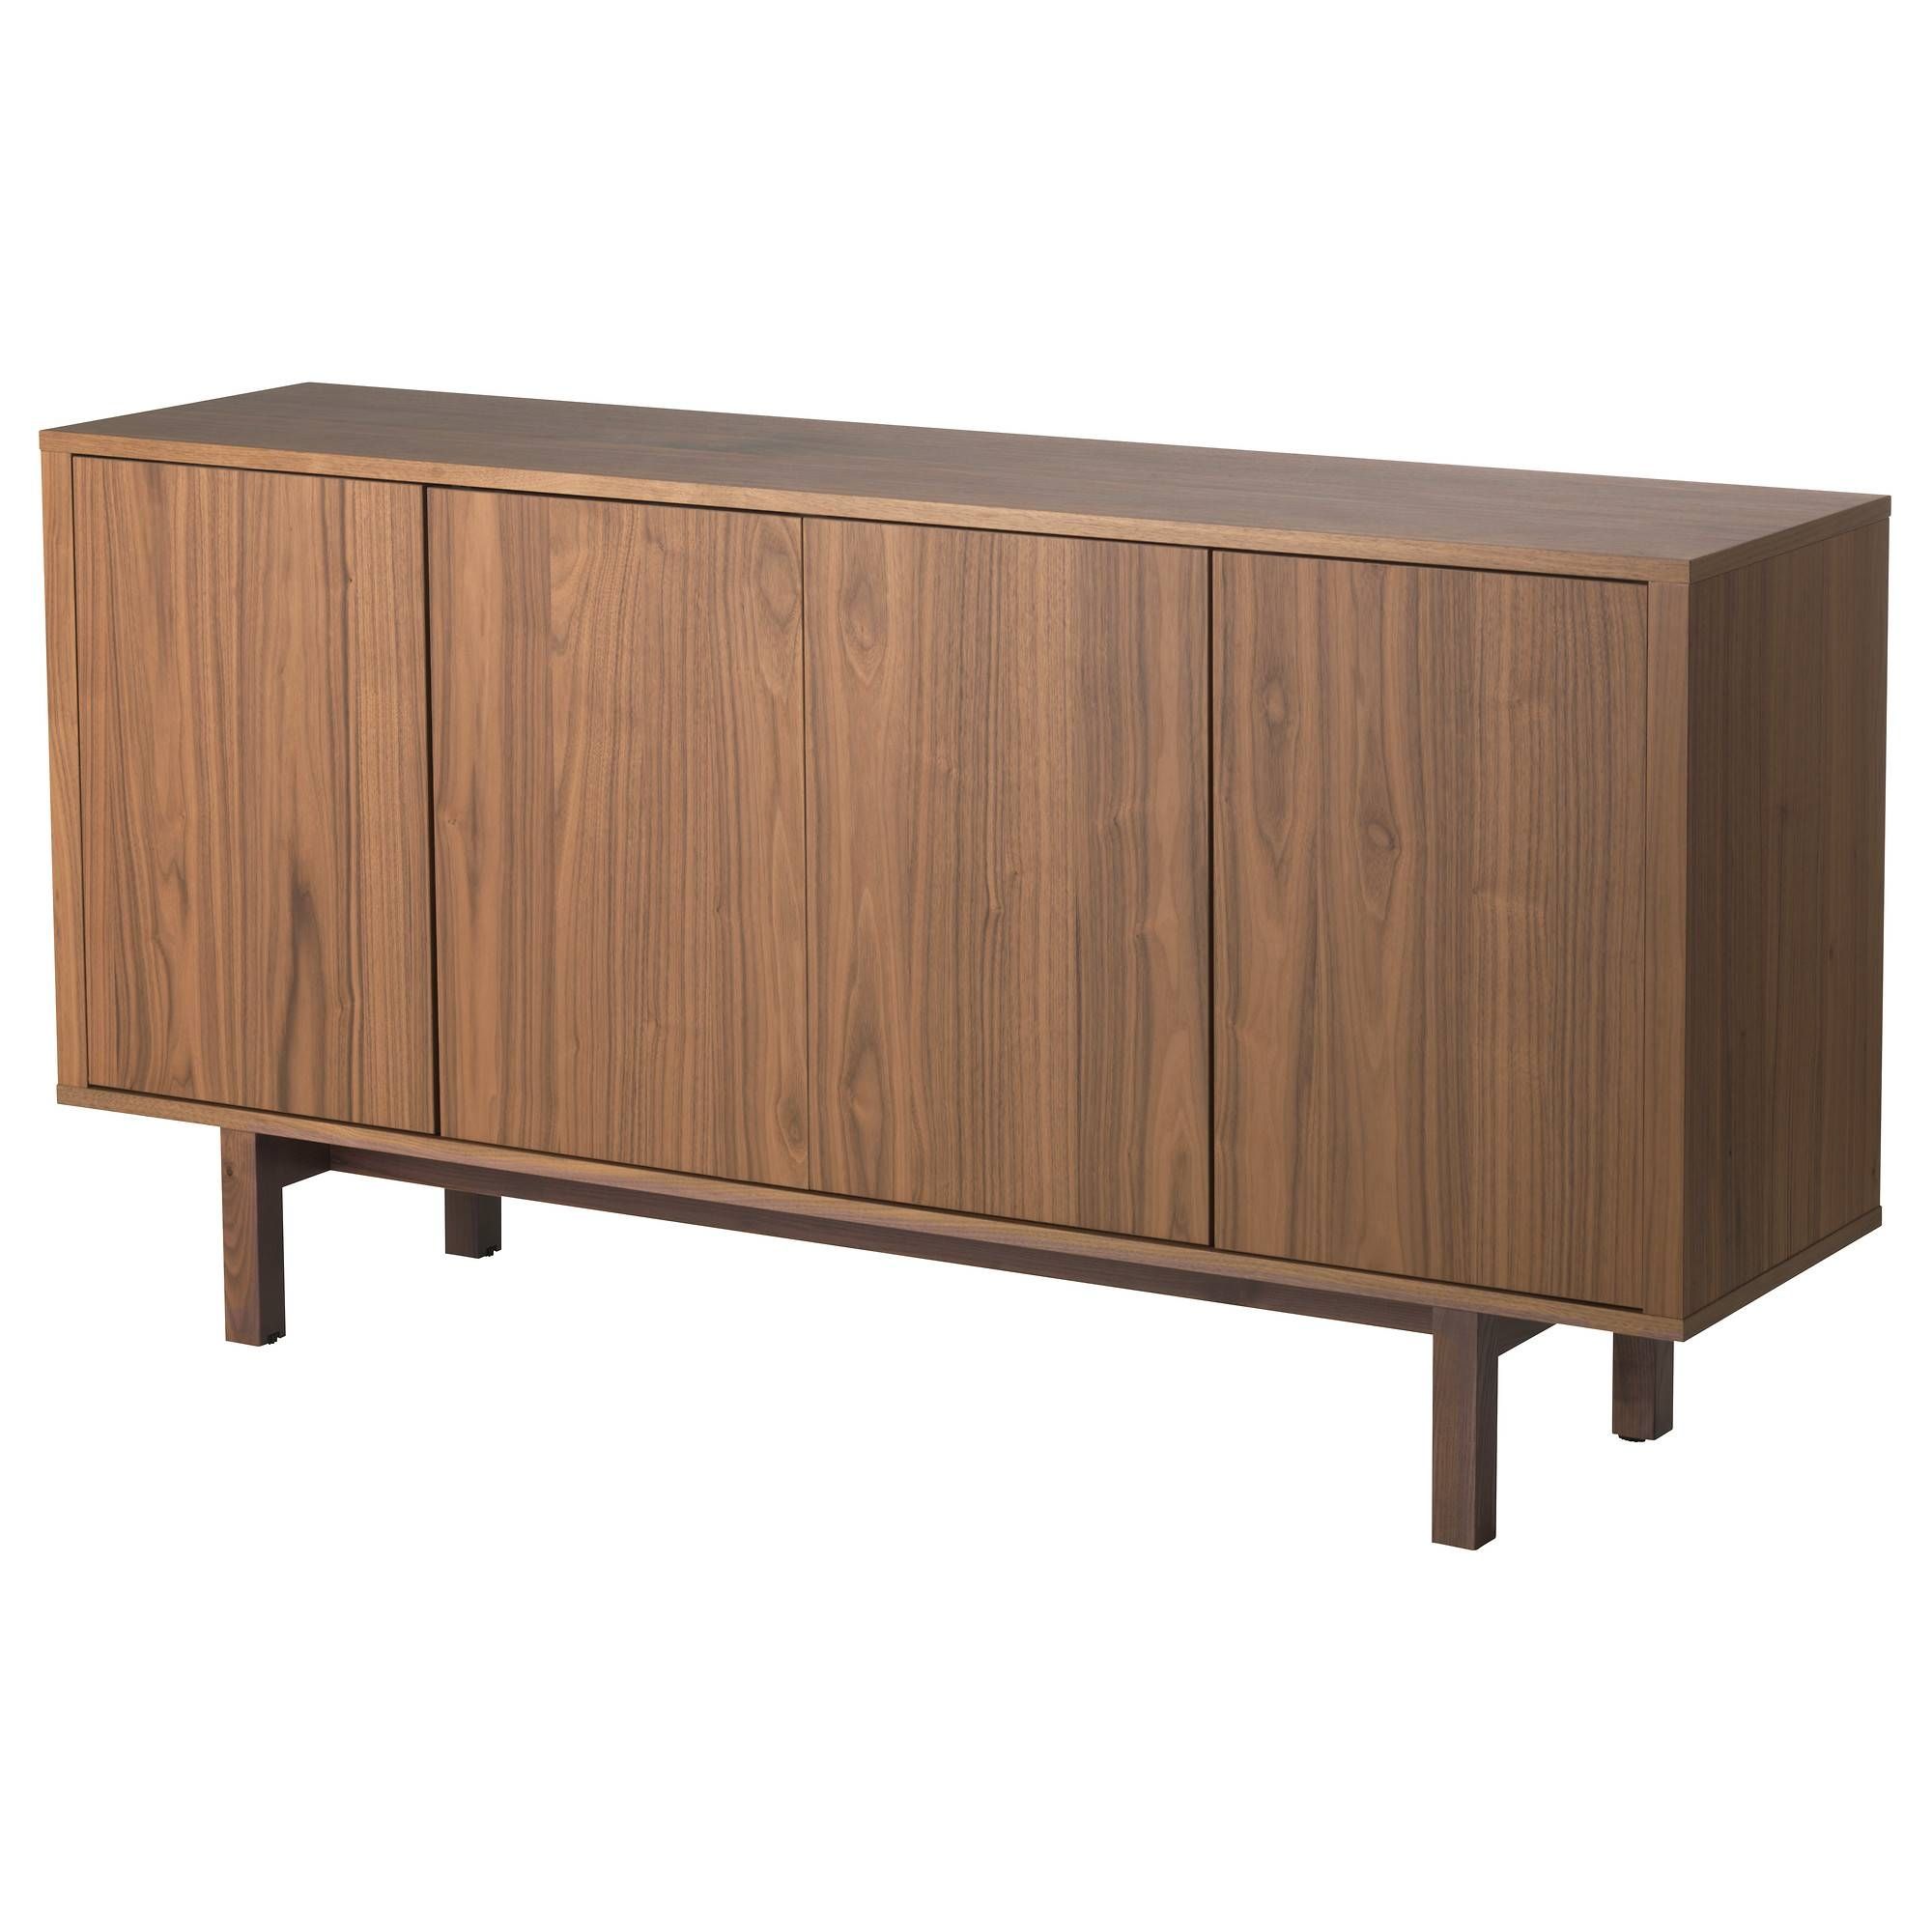 Buffet Tables & Sideboards – Ikea With Current Slim Oak Sideboards (View 15 of 15)